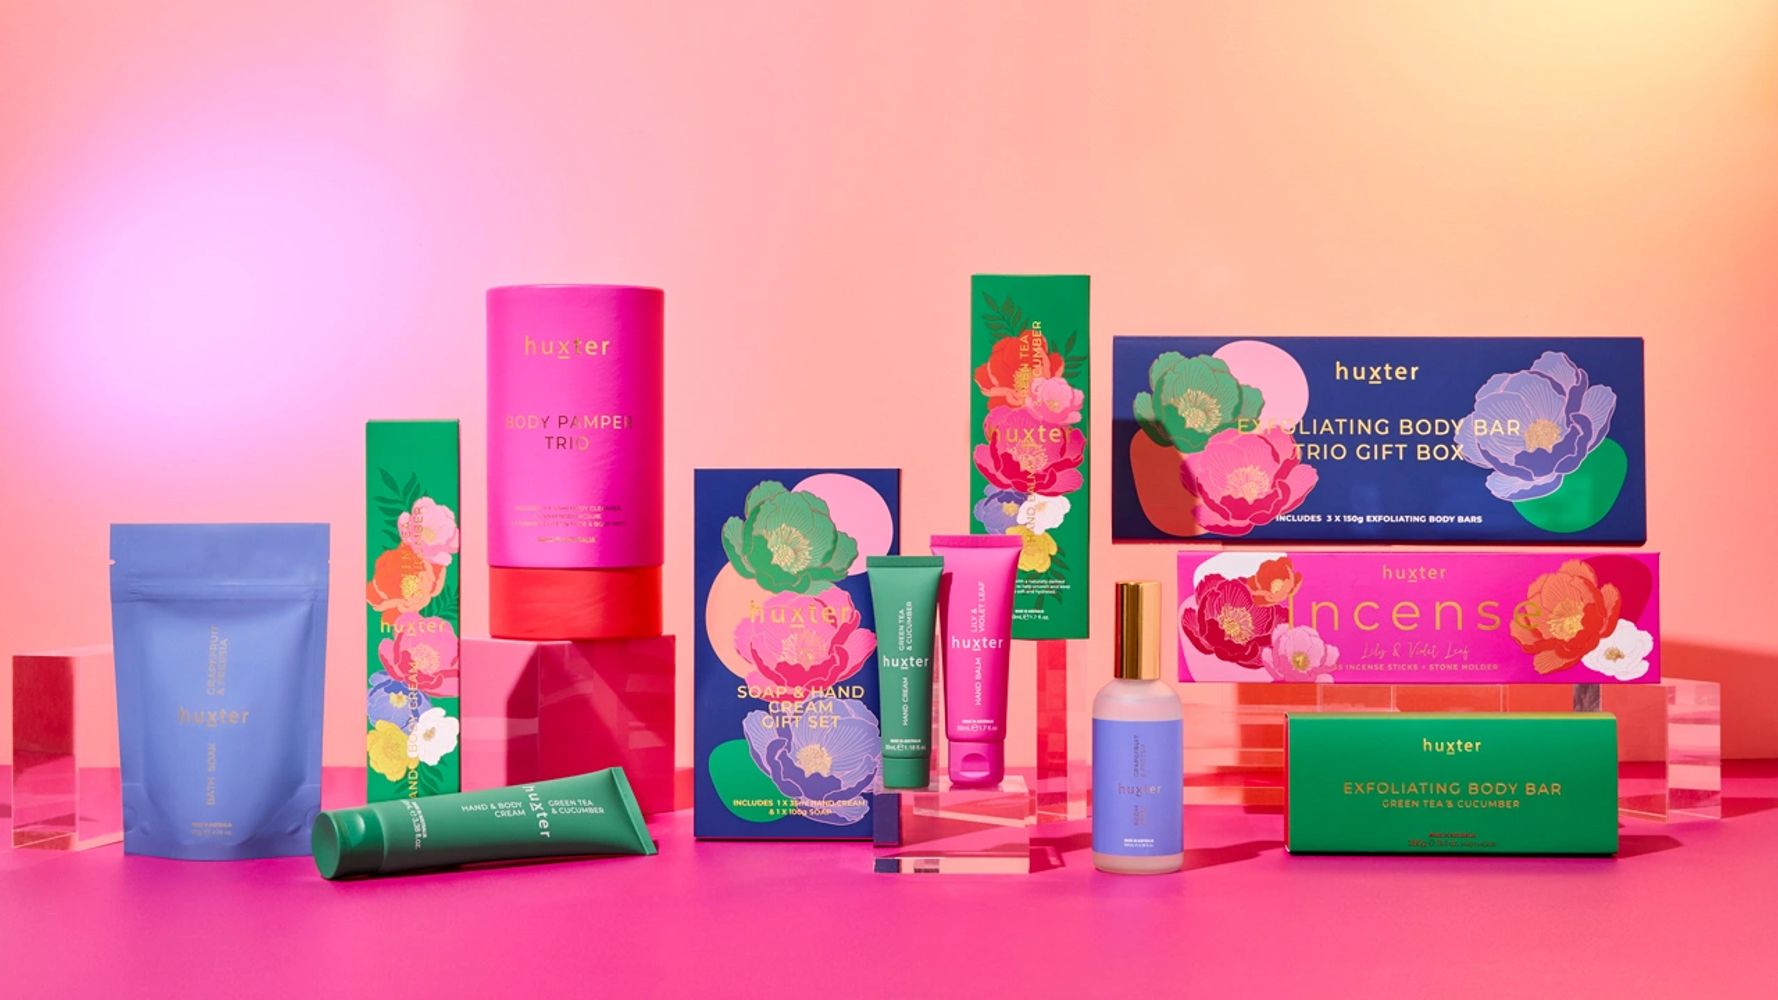 Huxter's NEW Bold Bloom's Collection of Bath and Body Gifting